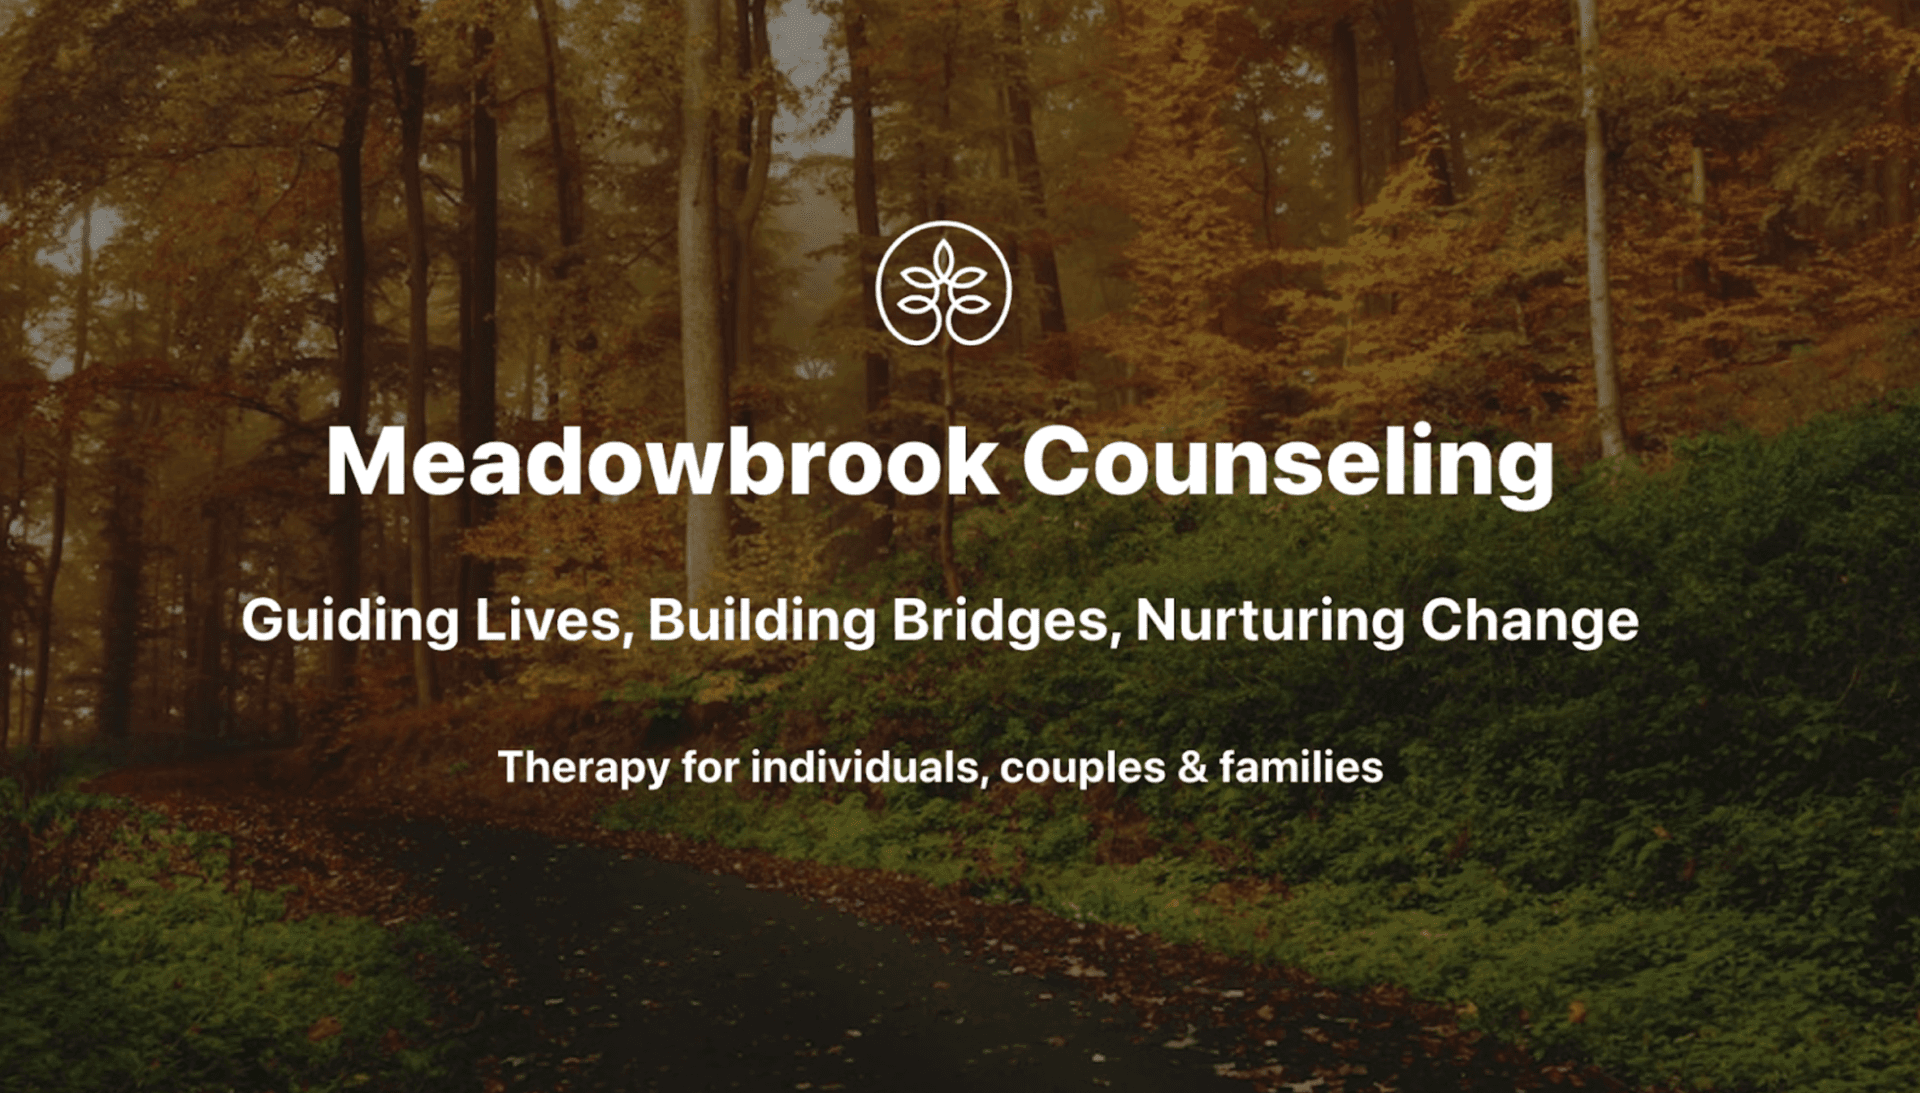 Meadowbrook Counseling Launches Innovative TMS Therapy in Orem, Utah, Offering a New Approach in Depression Treatment